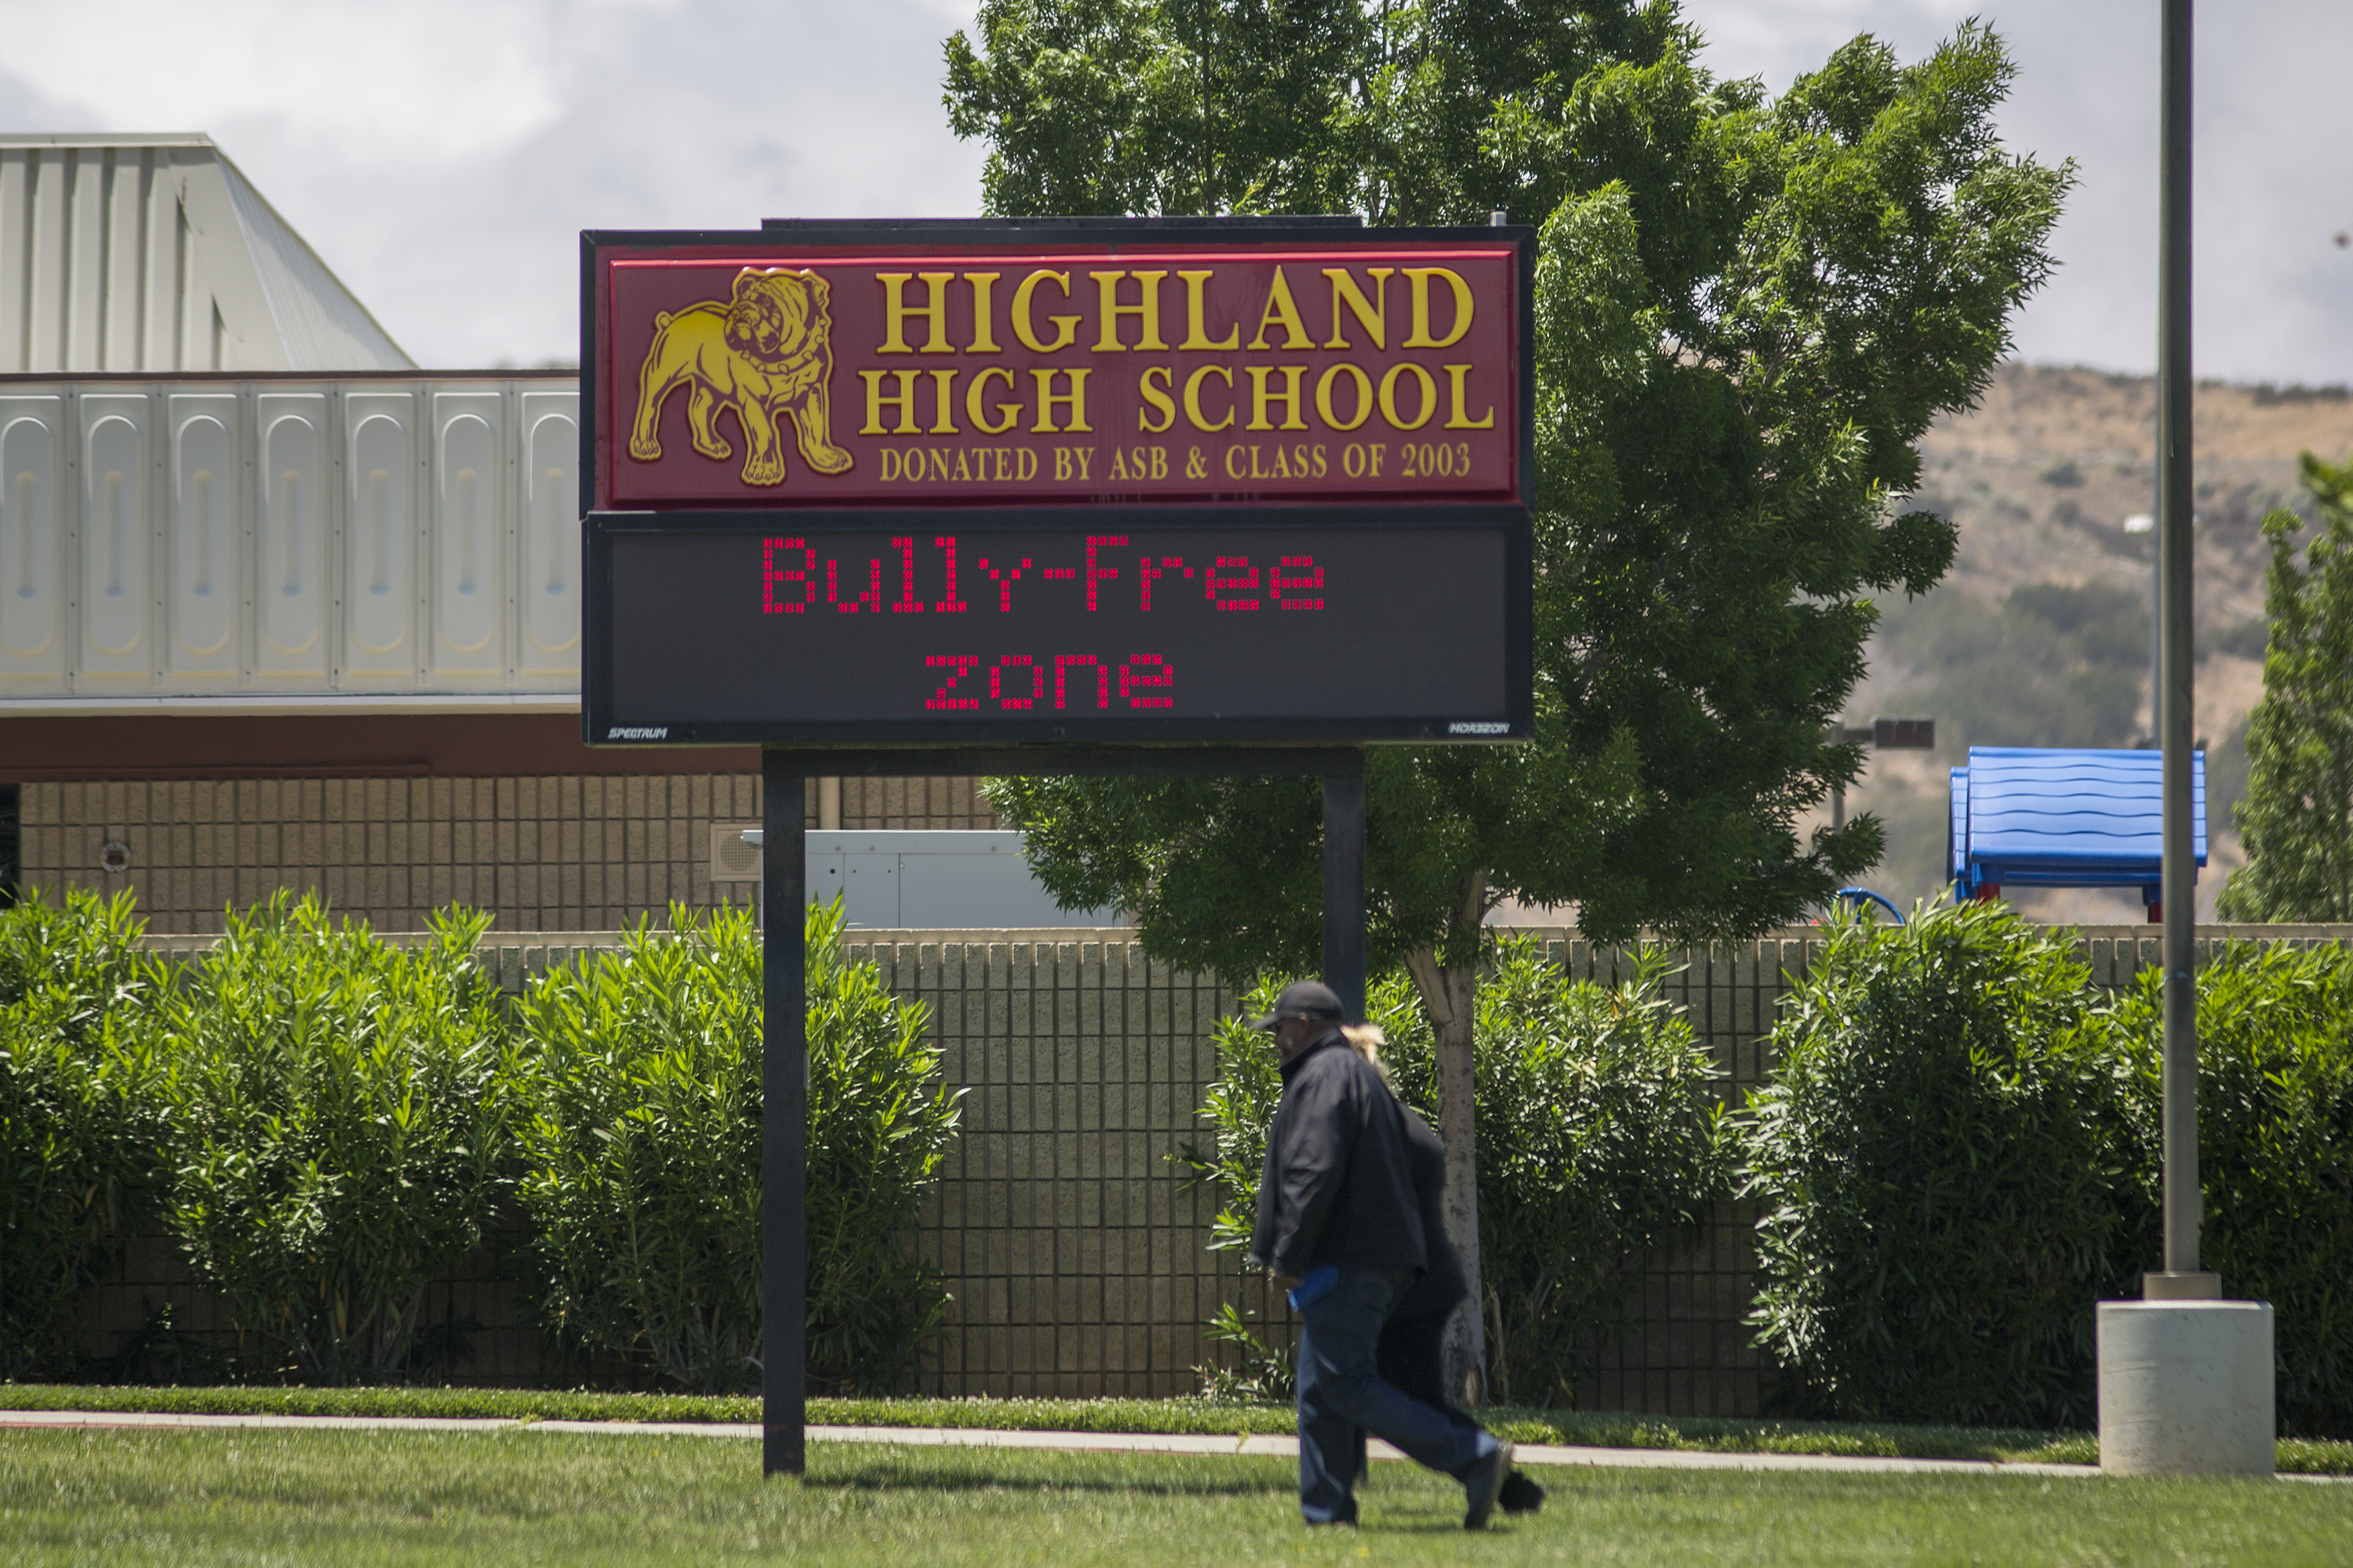 Shooting Reported At Highland High School In Palmdale, California